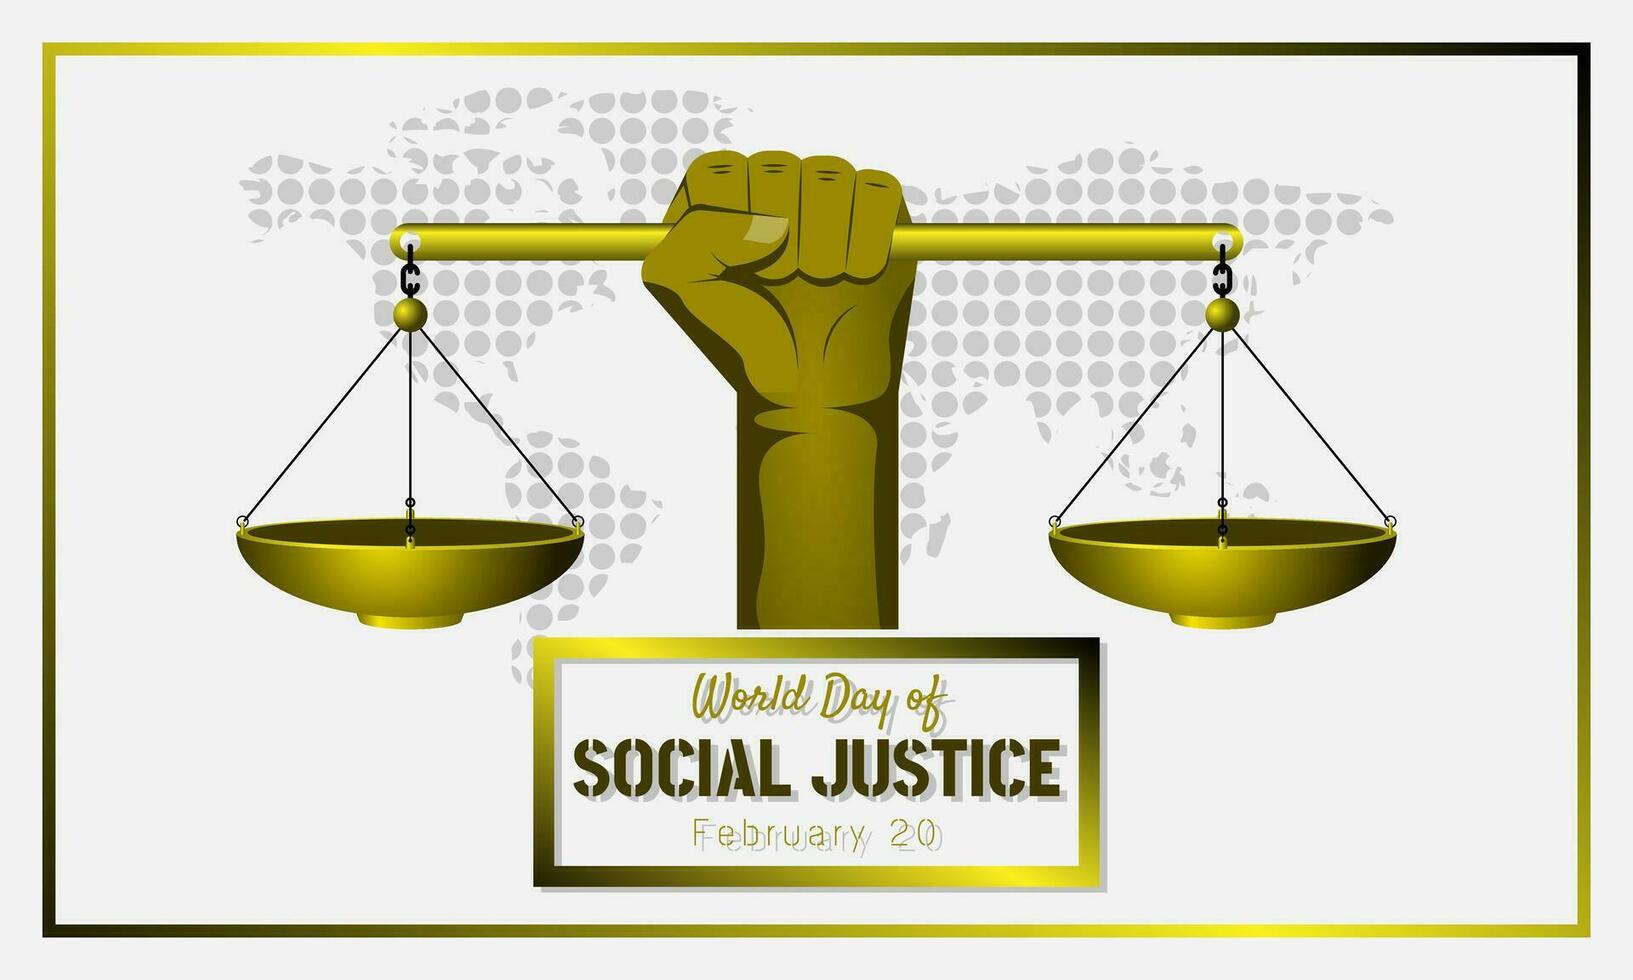 World Day of Social Justice poster with a hand holding gold scales vector